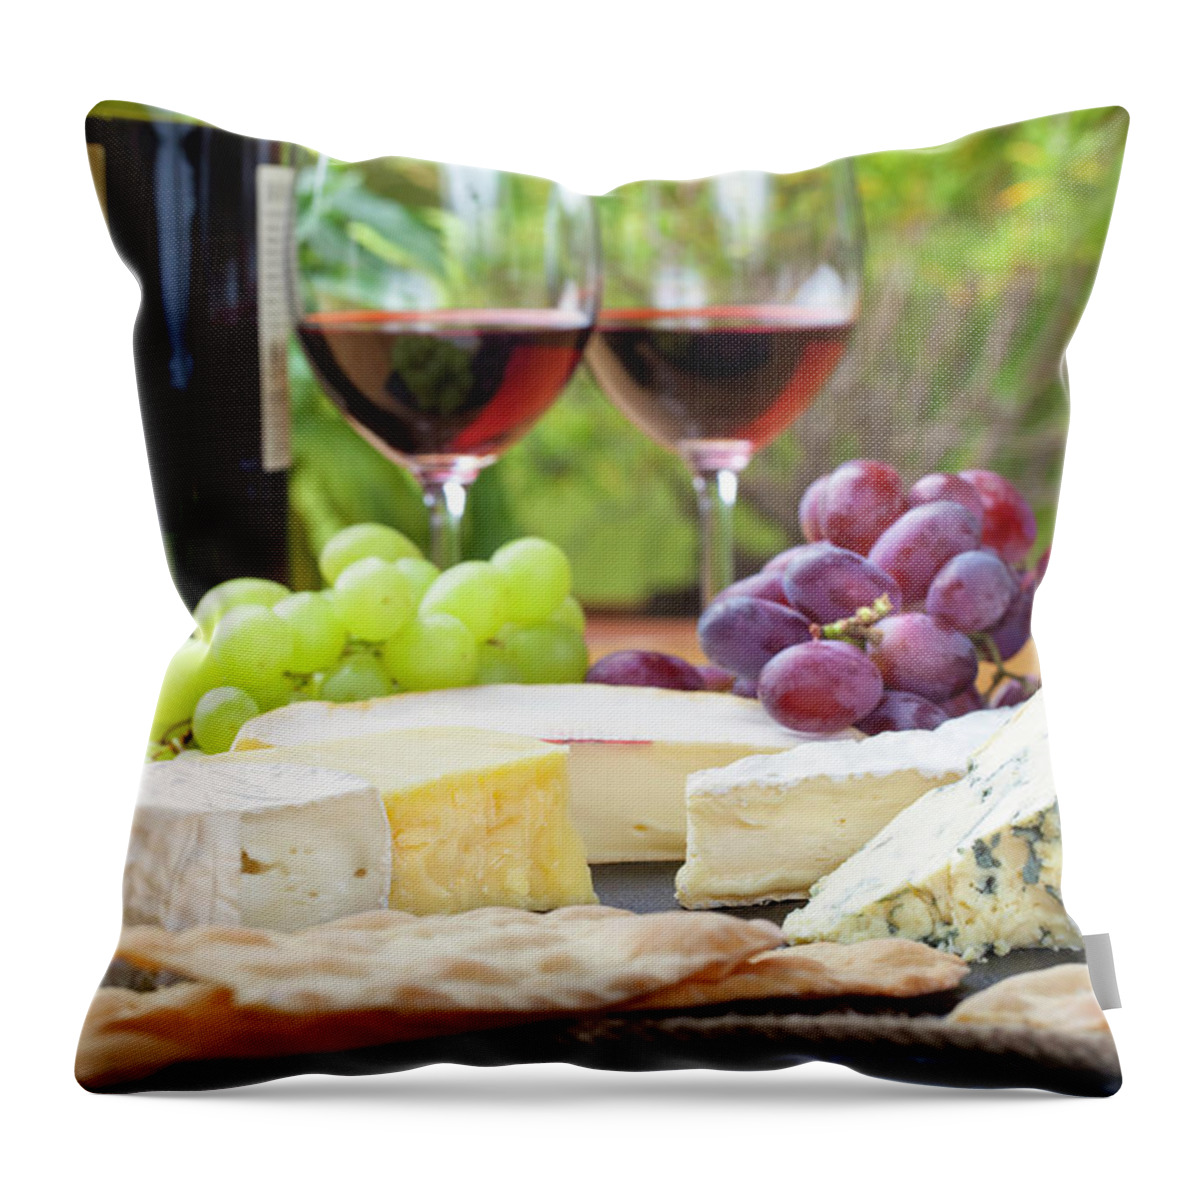 Cheese Throw Pillow featuring the photograph Wine And Cheese Platter by Nicolamargaret